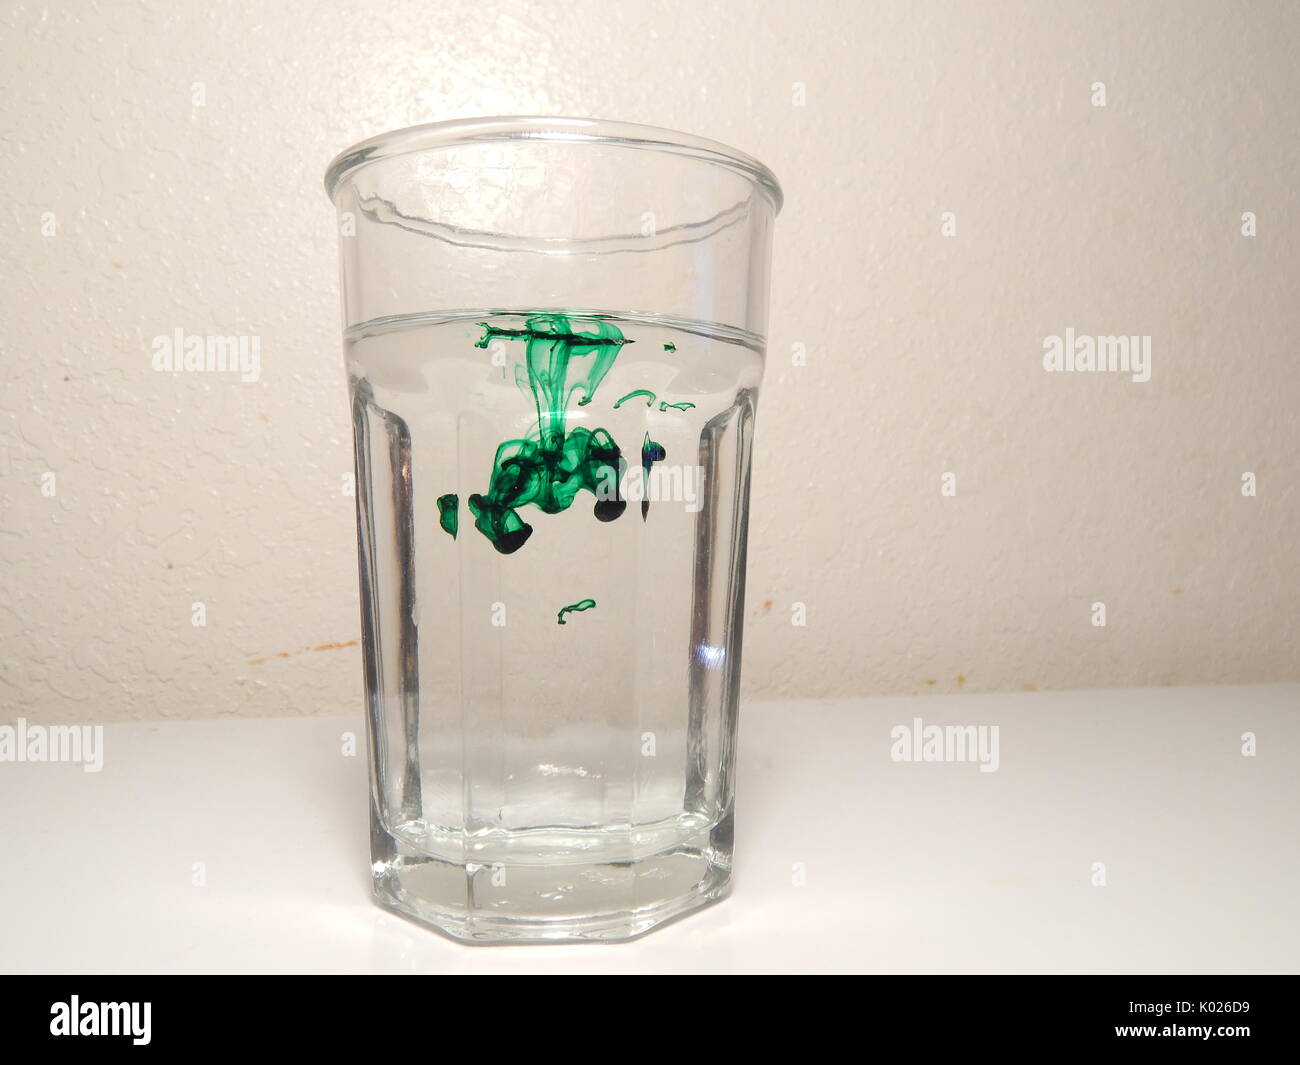 Food Coloring water experiment Stock Photo